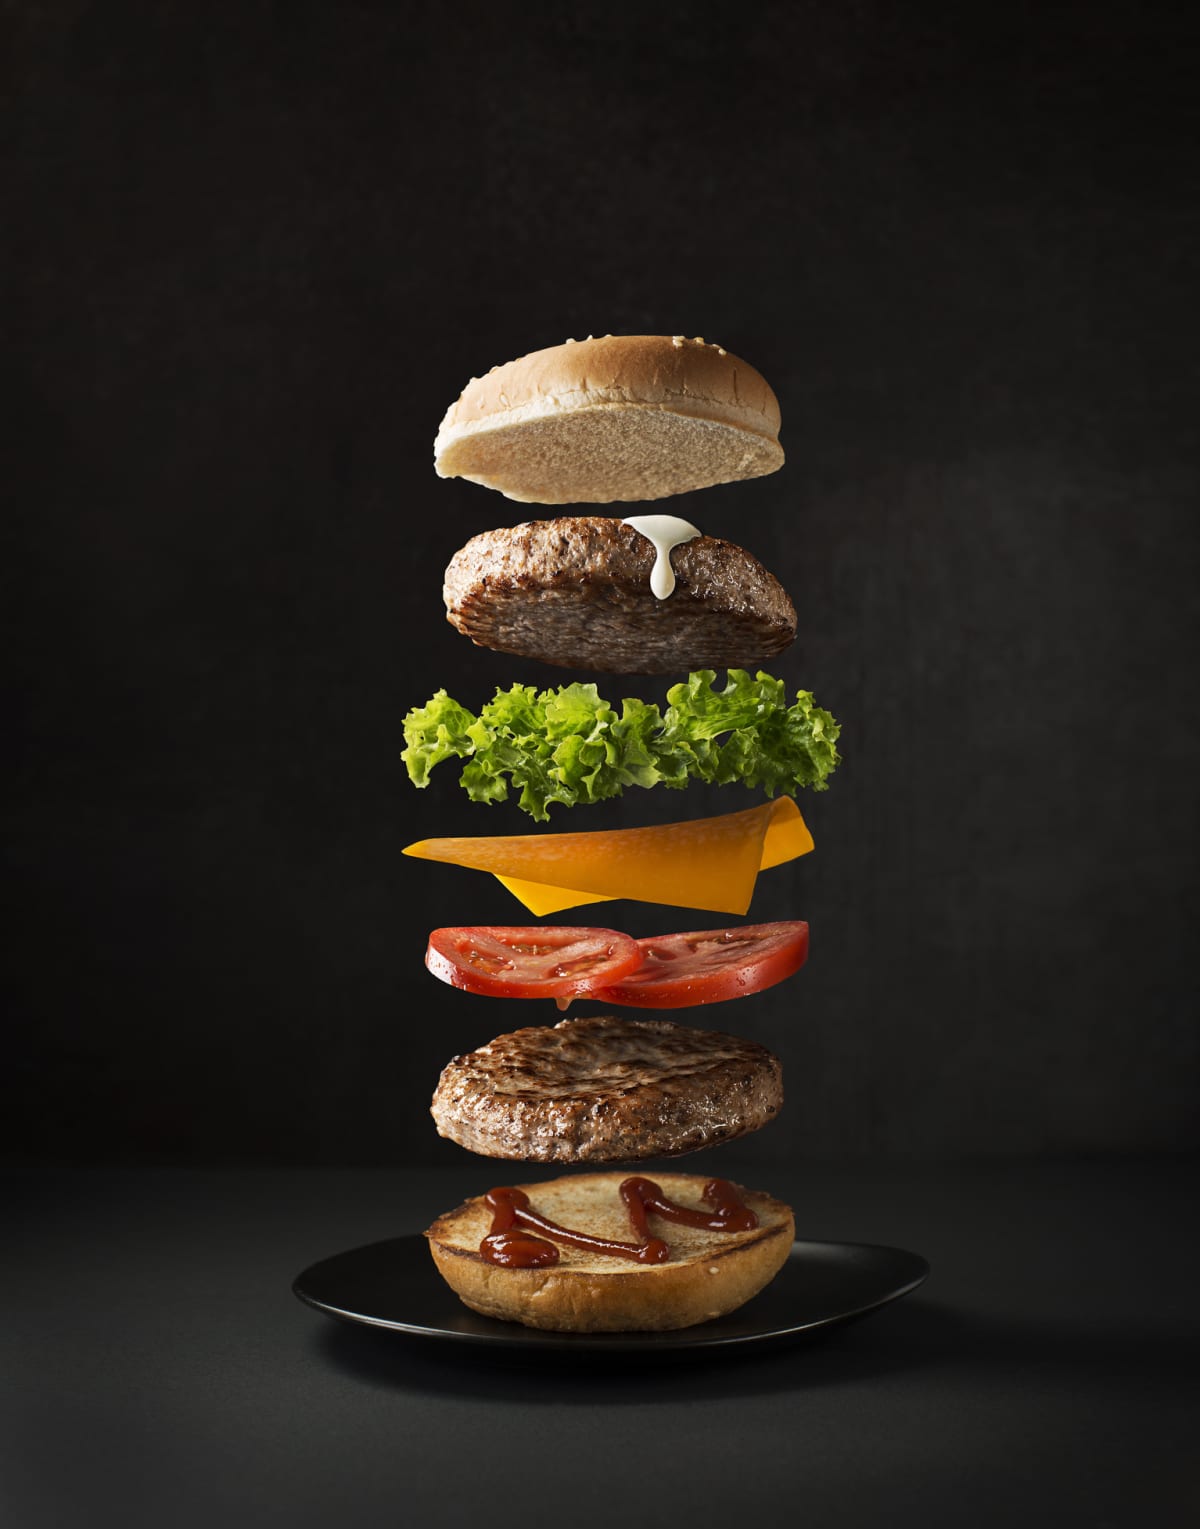 Maxi hamburger with flying ingredients placed on black background. Conceptual jumping Burger. Delicious and attractive hamburger with refreshing ingredients